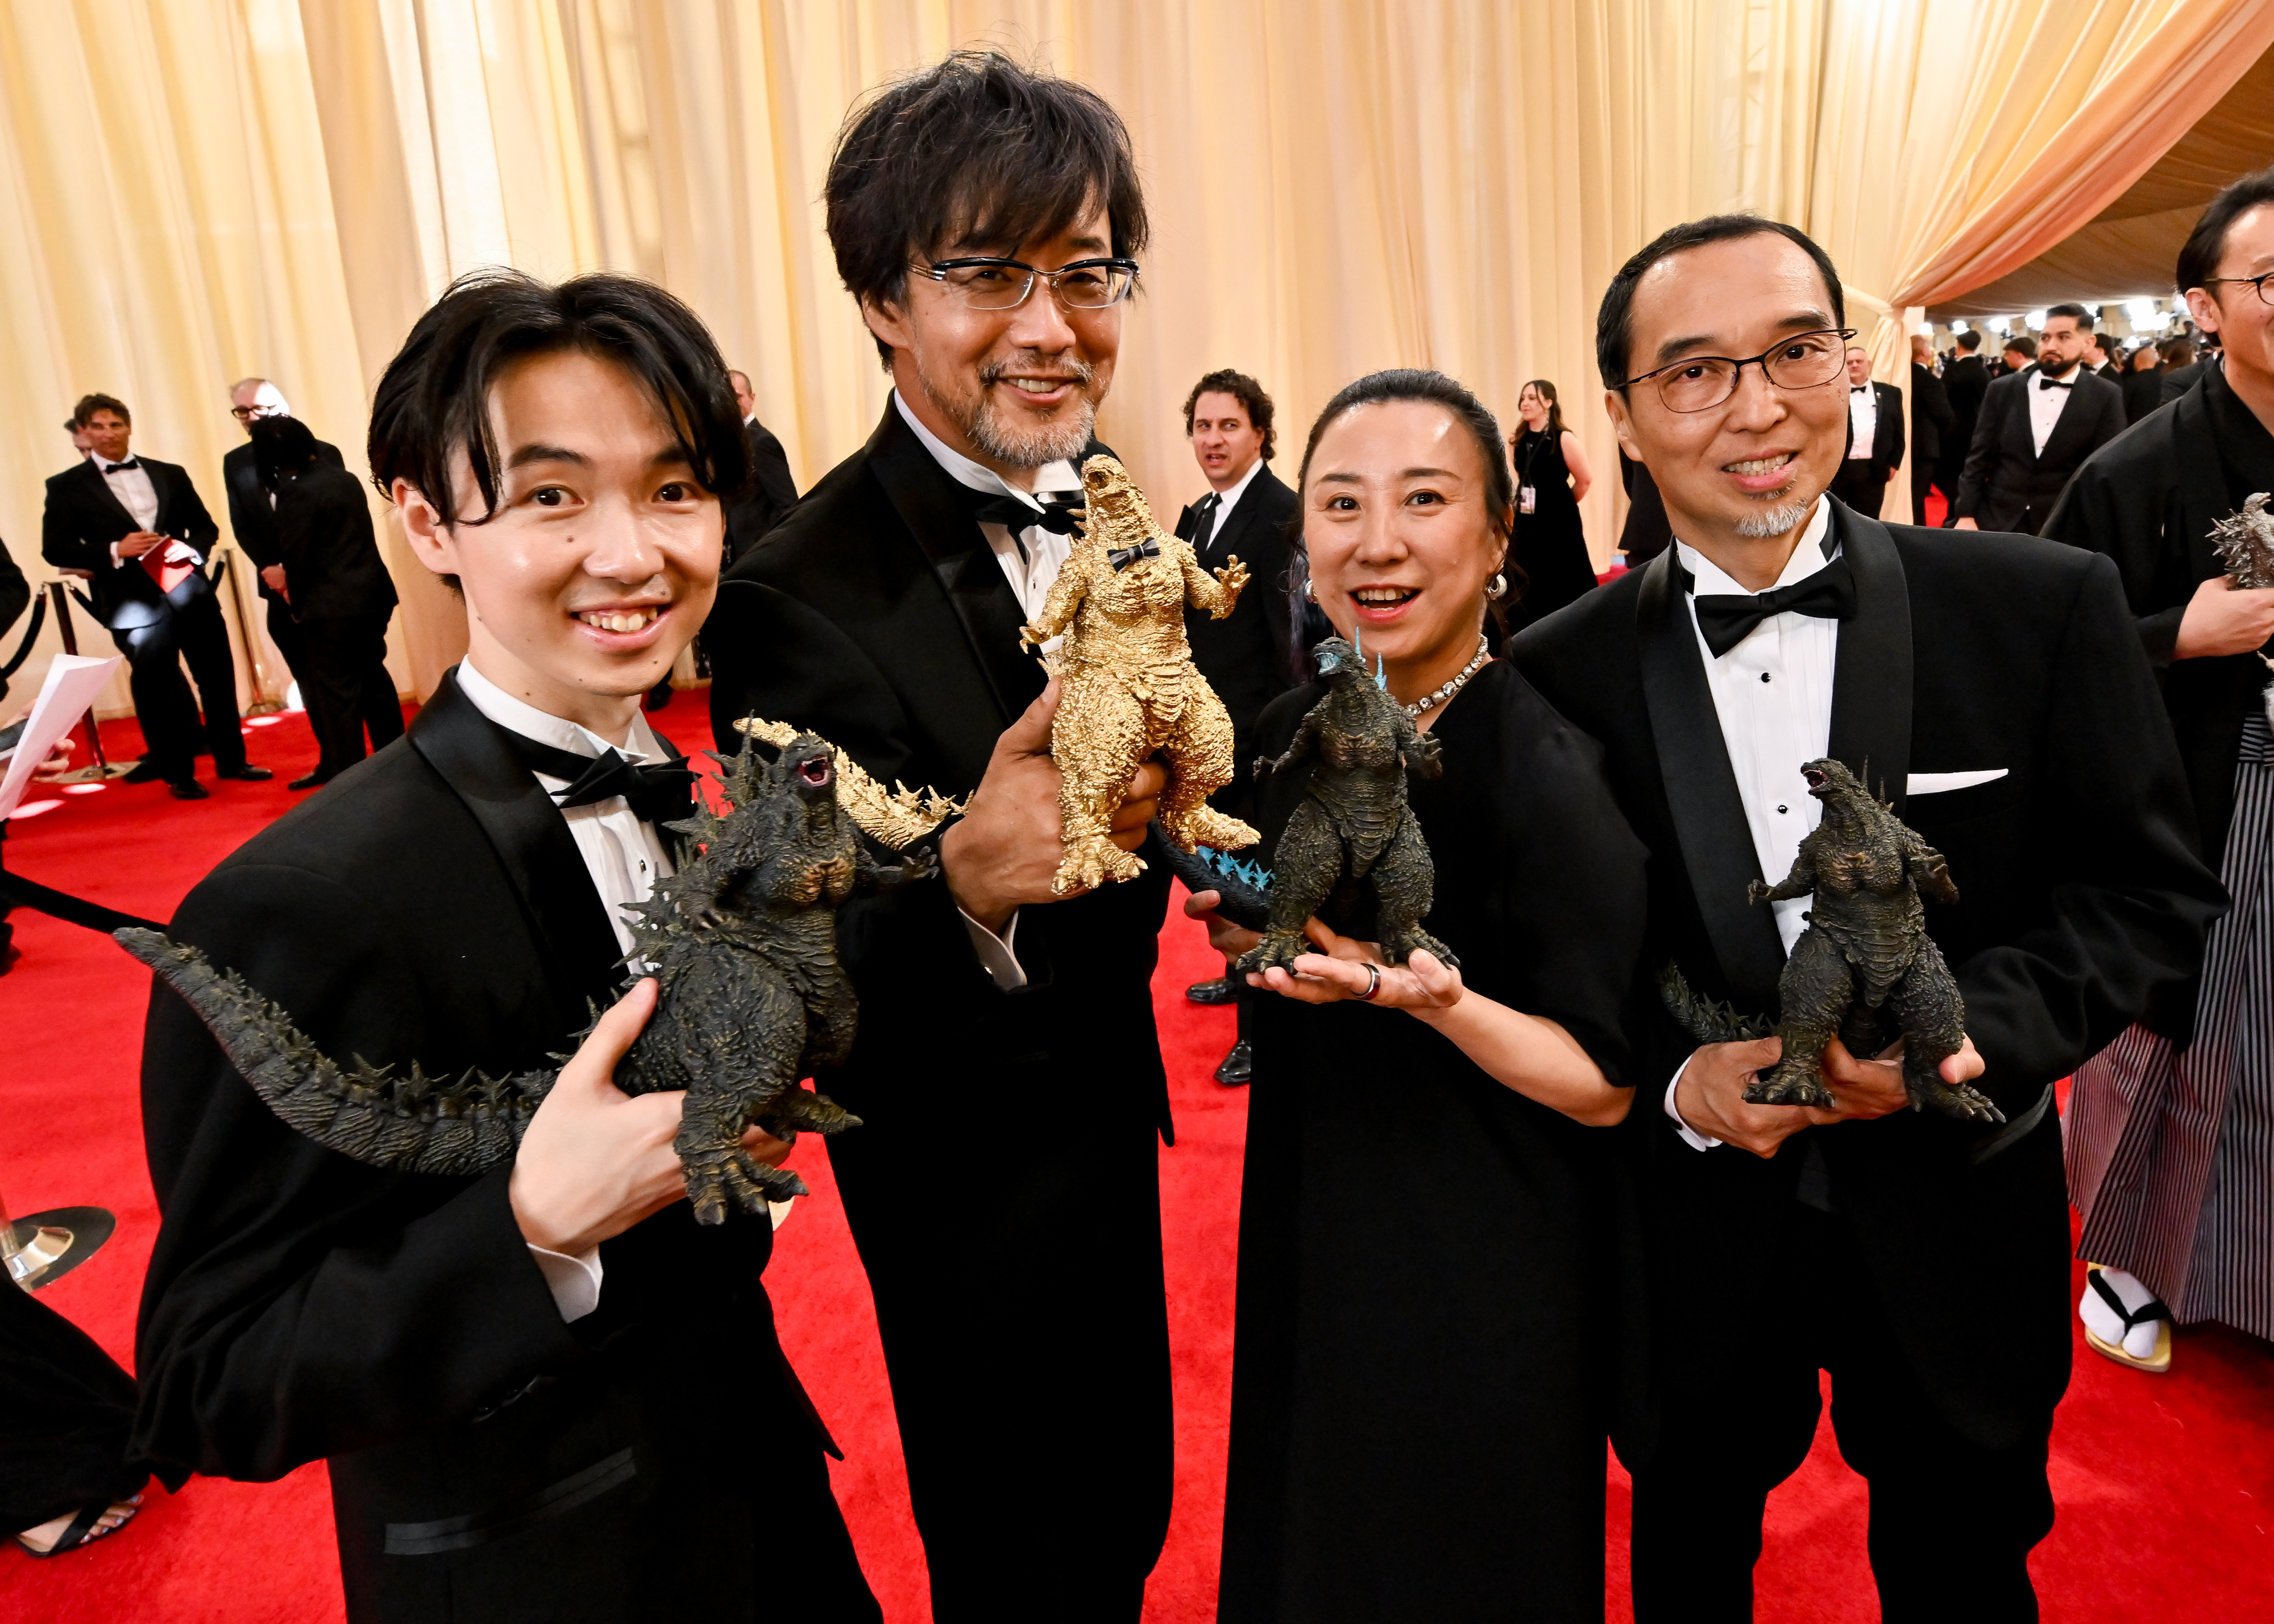 Four individuals posing with Godzilla figures; two men in tuxedos, one woman in dress, celebratory event